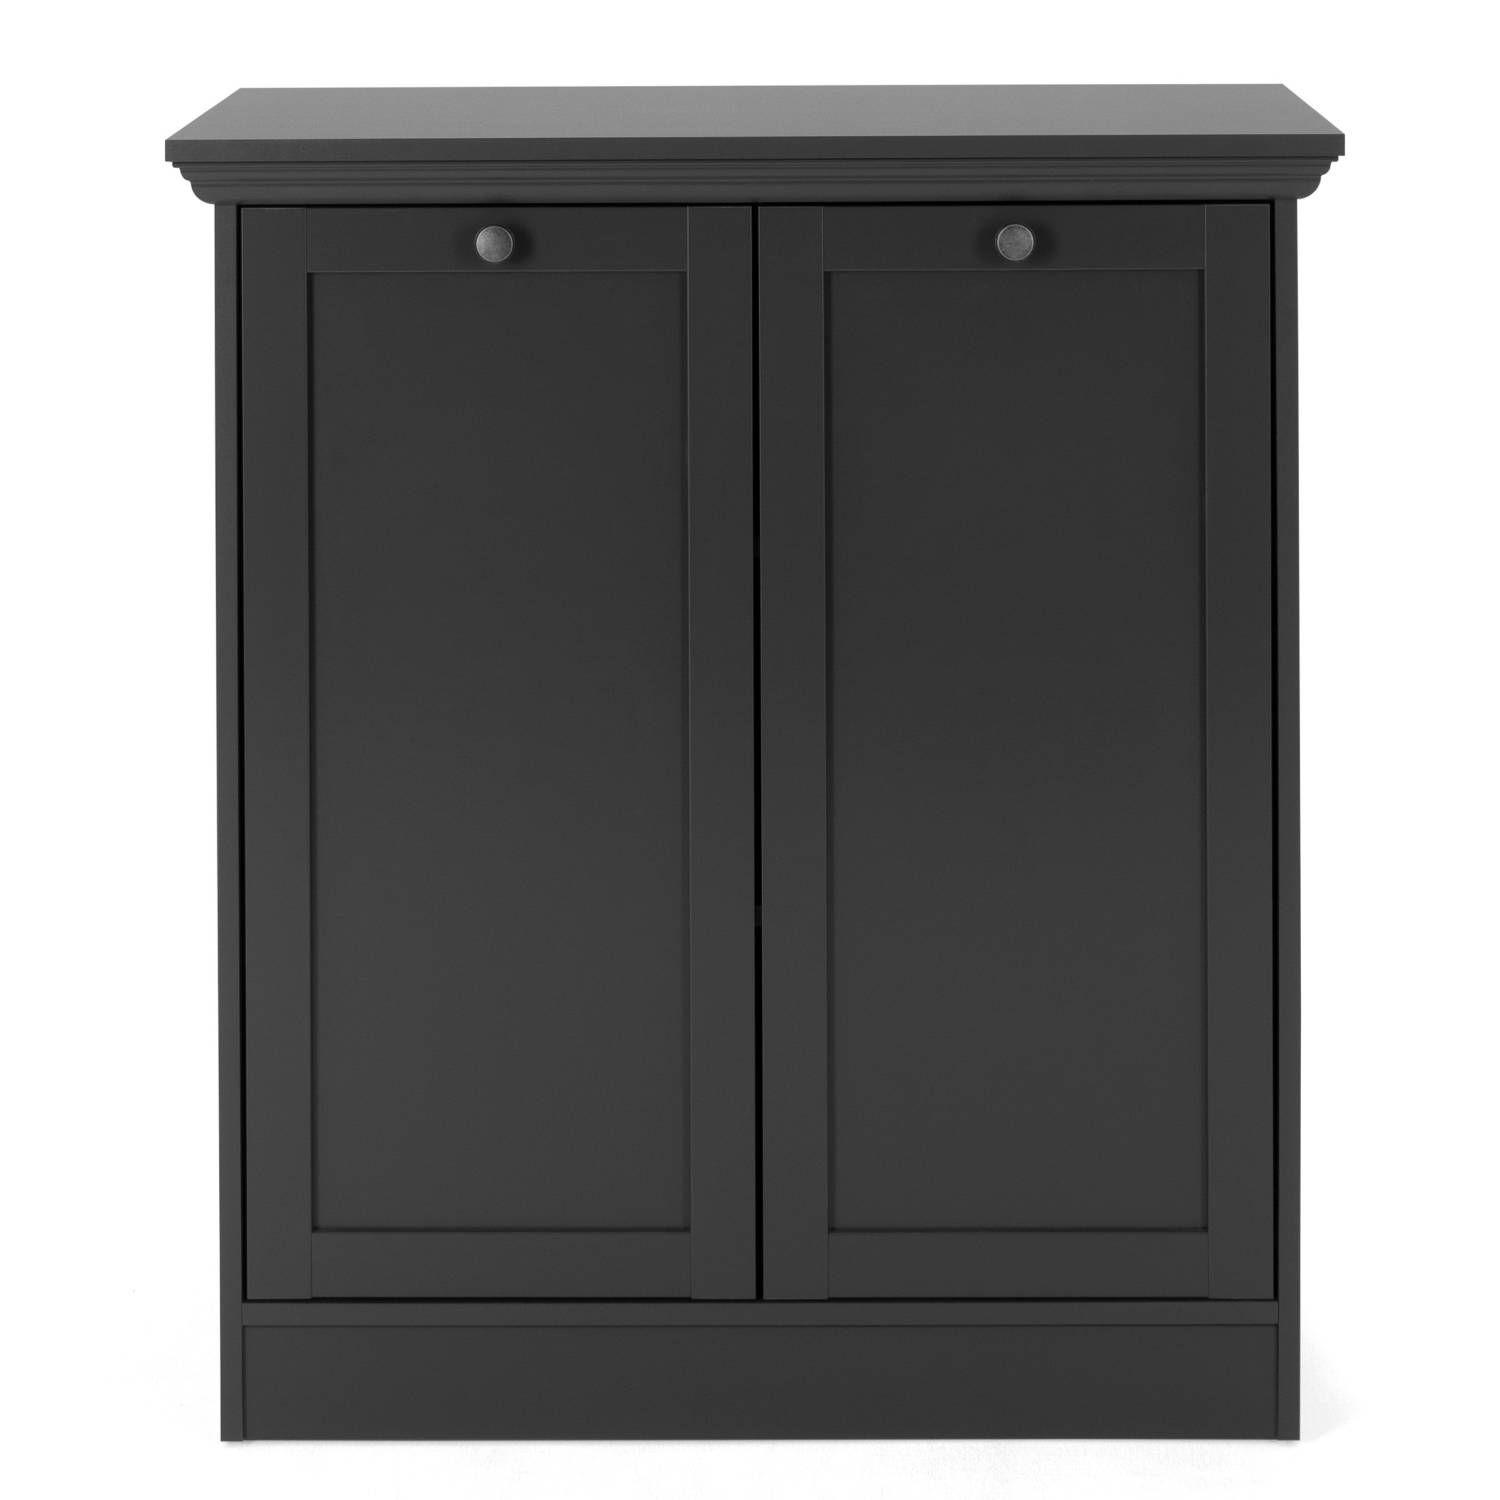 Sideboard Chest of Drawers Living Room Cupboard Cabinet Wood Anthracite